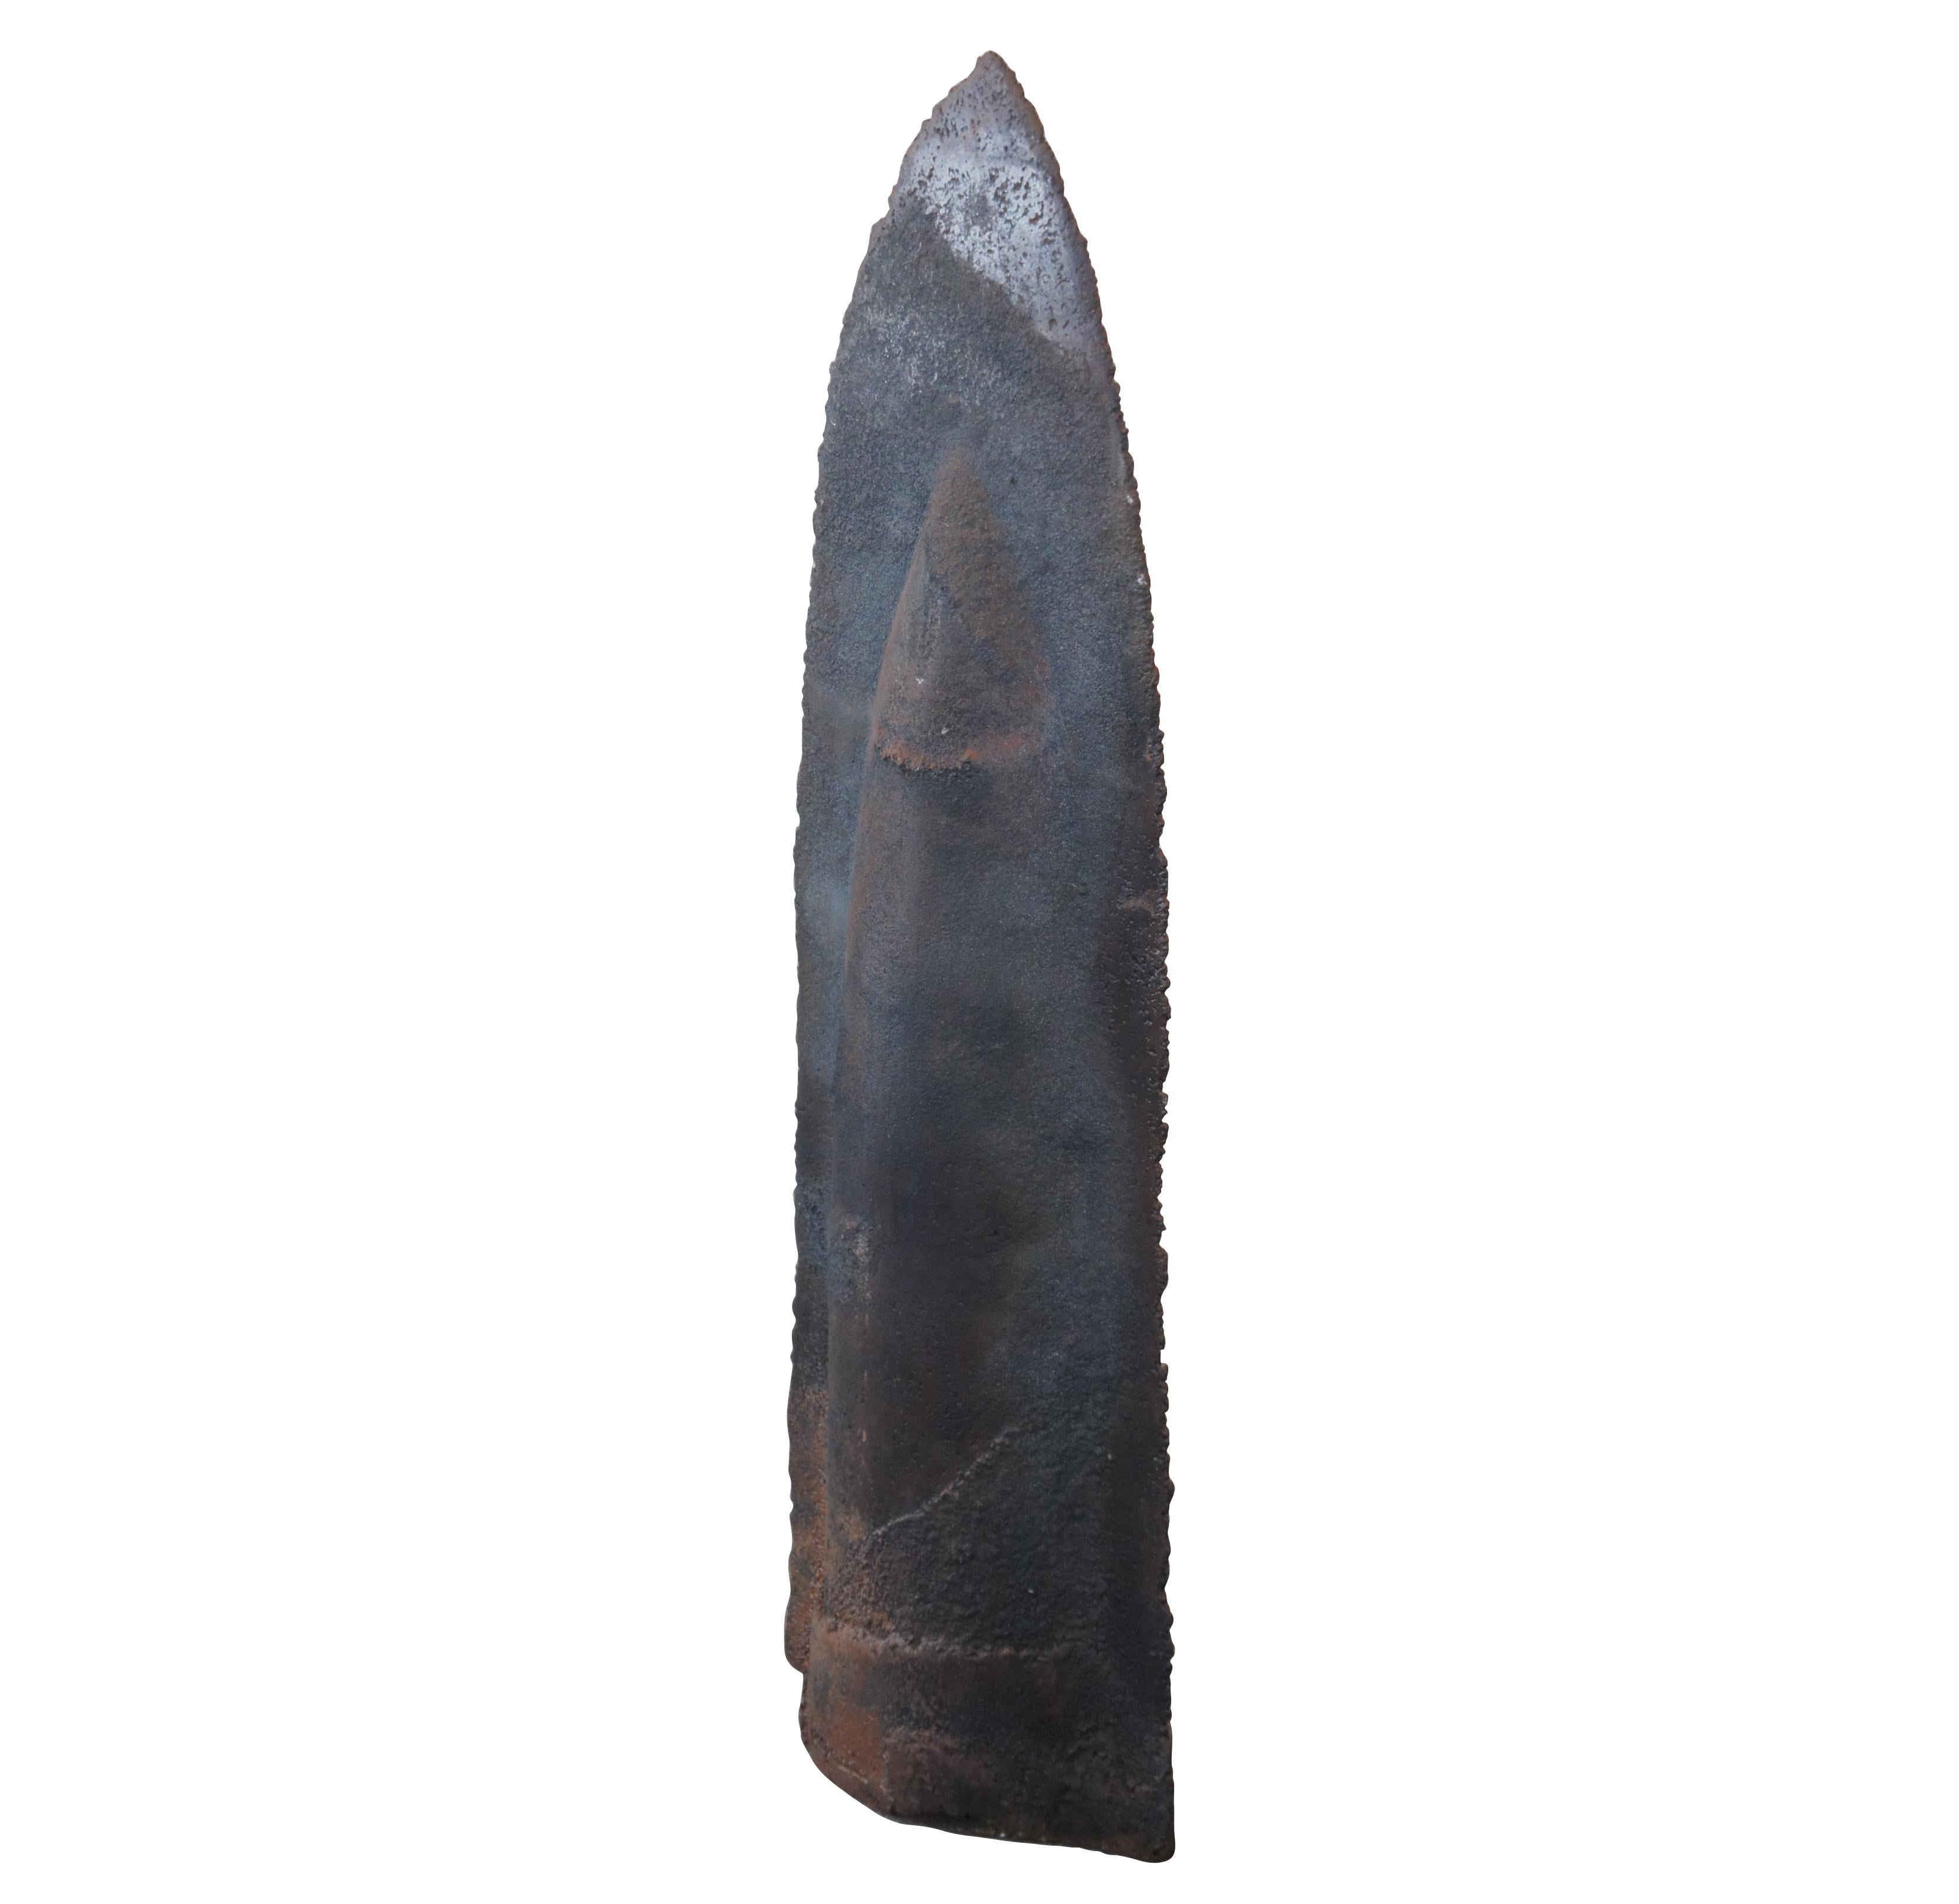 An Impressive Cast Iron floor sculpture by Josep Maria Subirachs, circa 1960s. Reminiscent in form to an arrowhead or primitive blade. Josep incorporated grattage leaving the surface rough and jagged. Signed along the lower edge. From the private